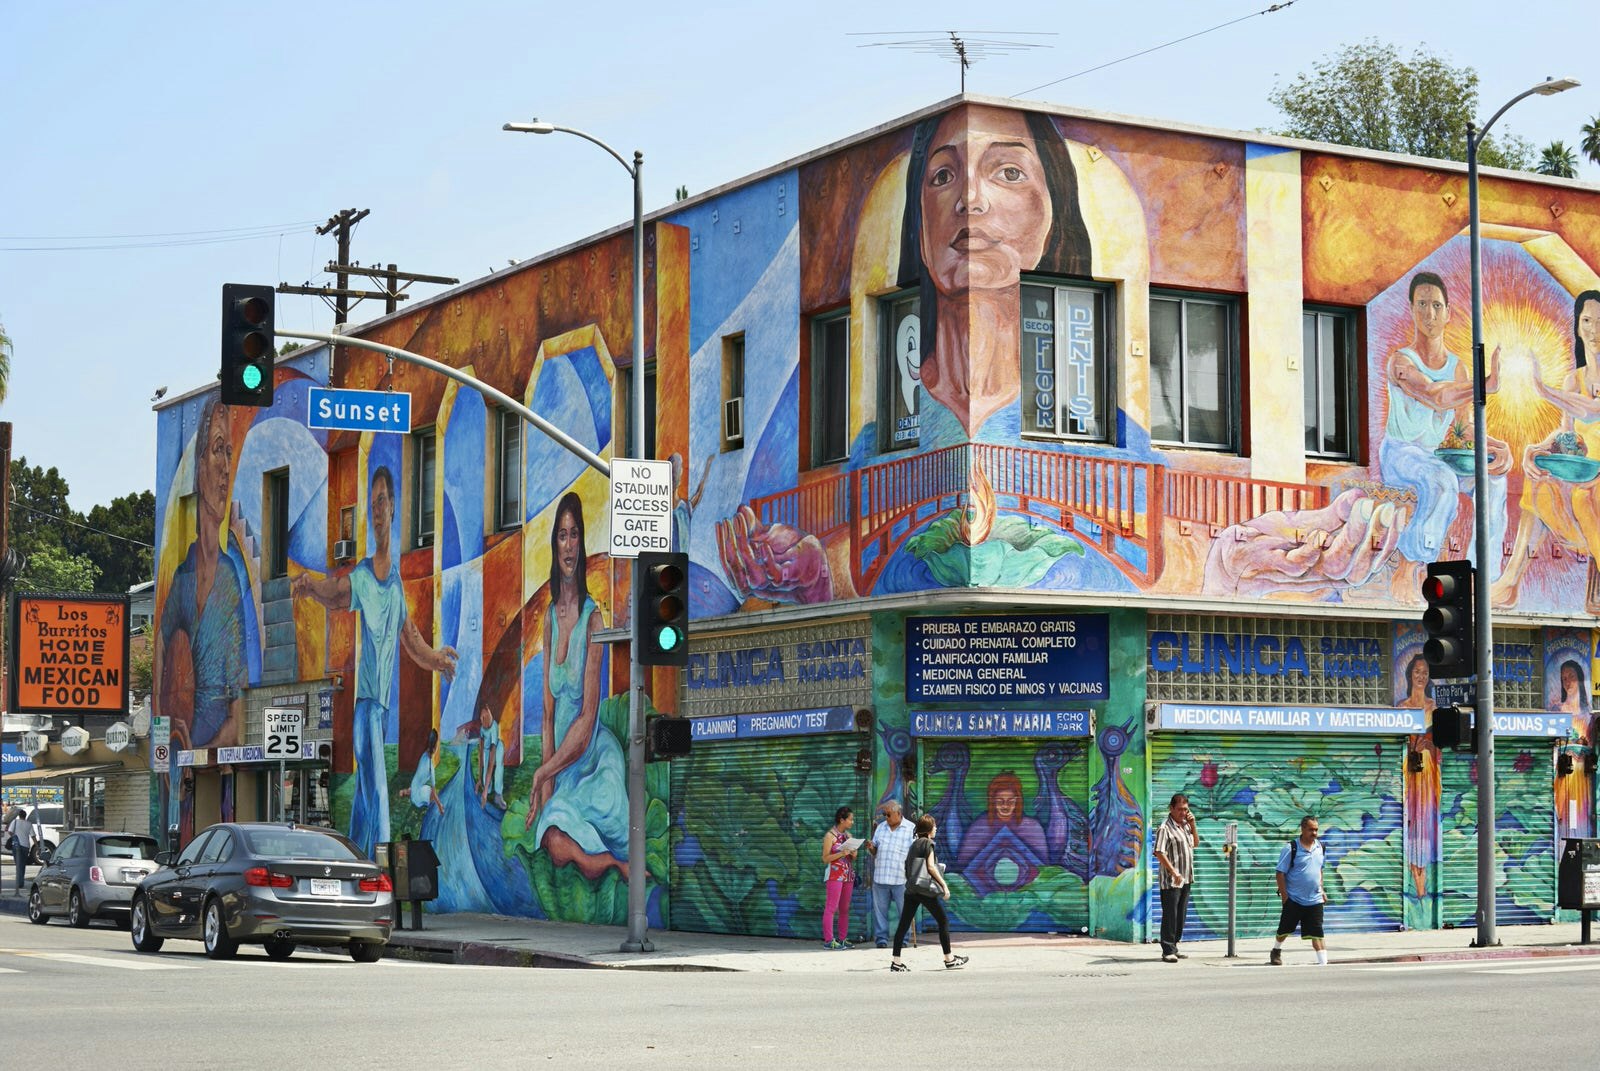 A building covered in street art in Echo Park, LA © Simon Urwin / Lonely Planet